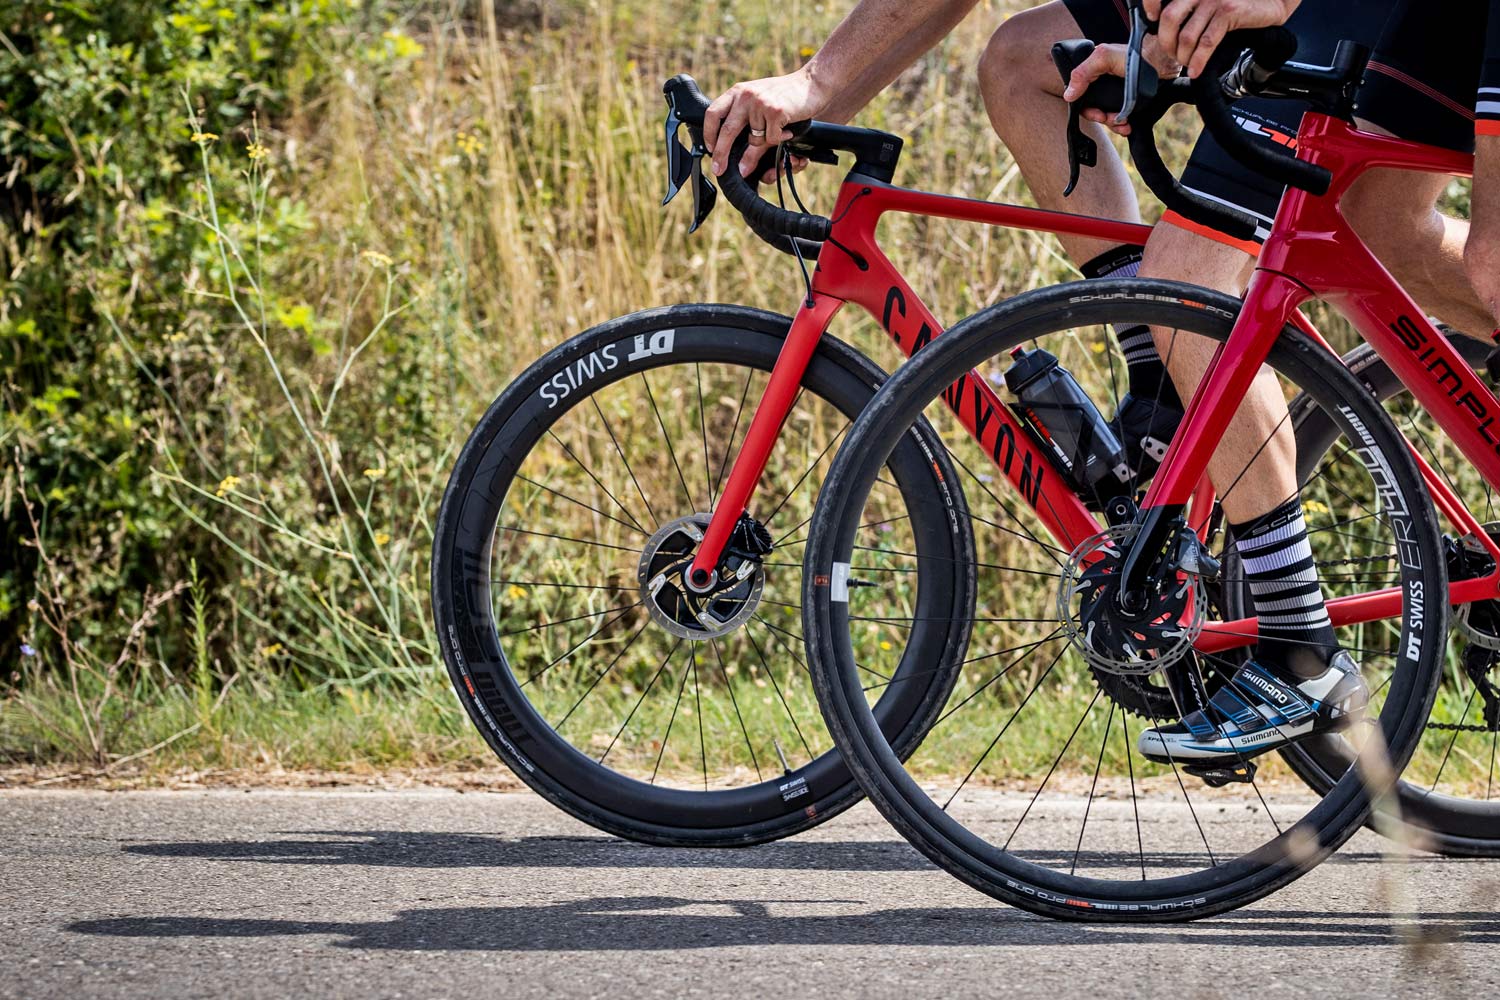 2020 all new Schwalbe Pro One TLE tubeless road bike tire, faster supple souplesse, photo by Irmo Keizer